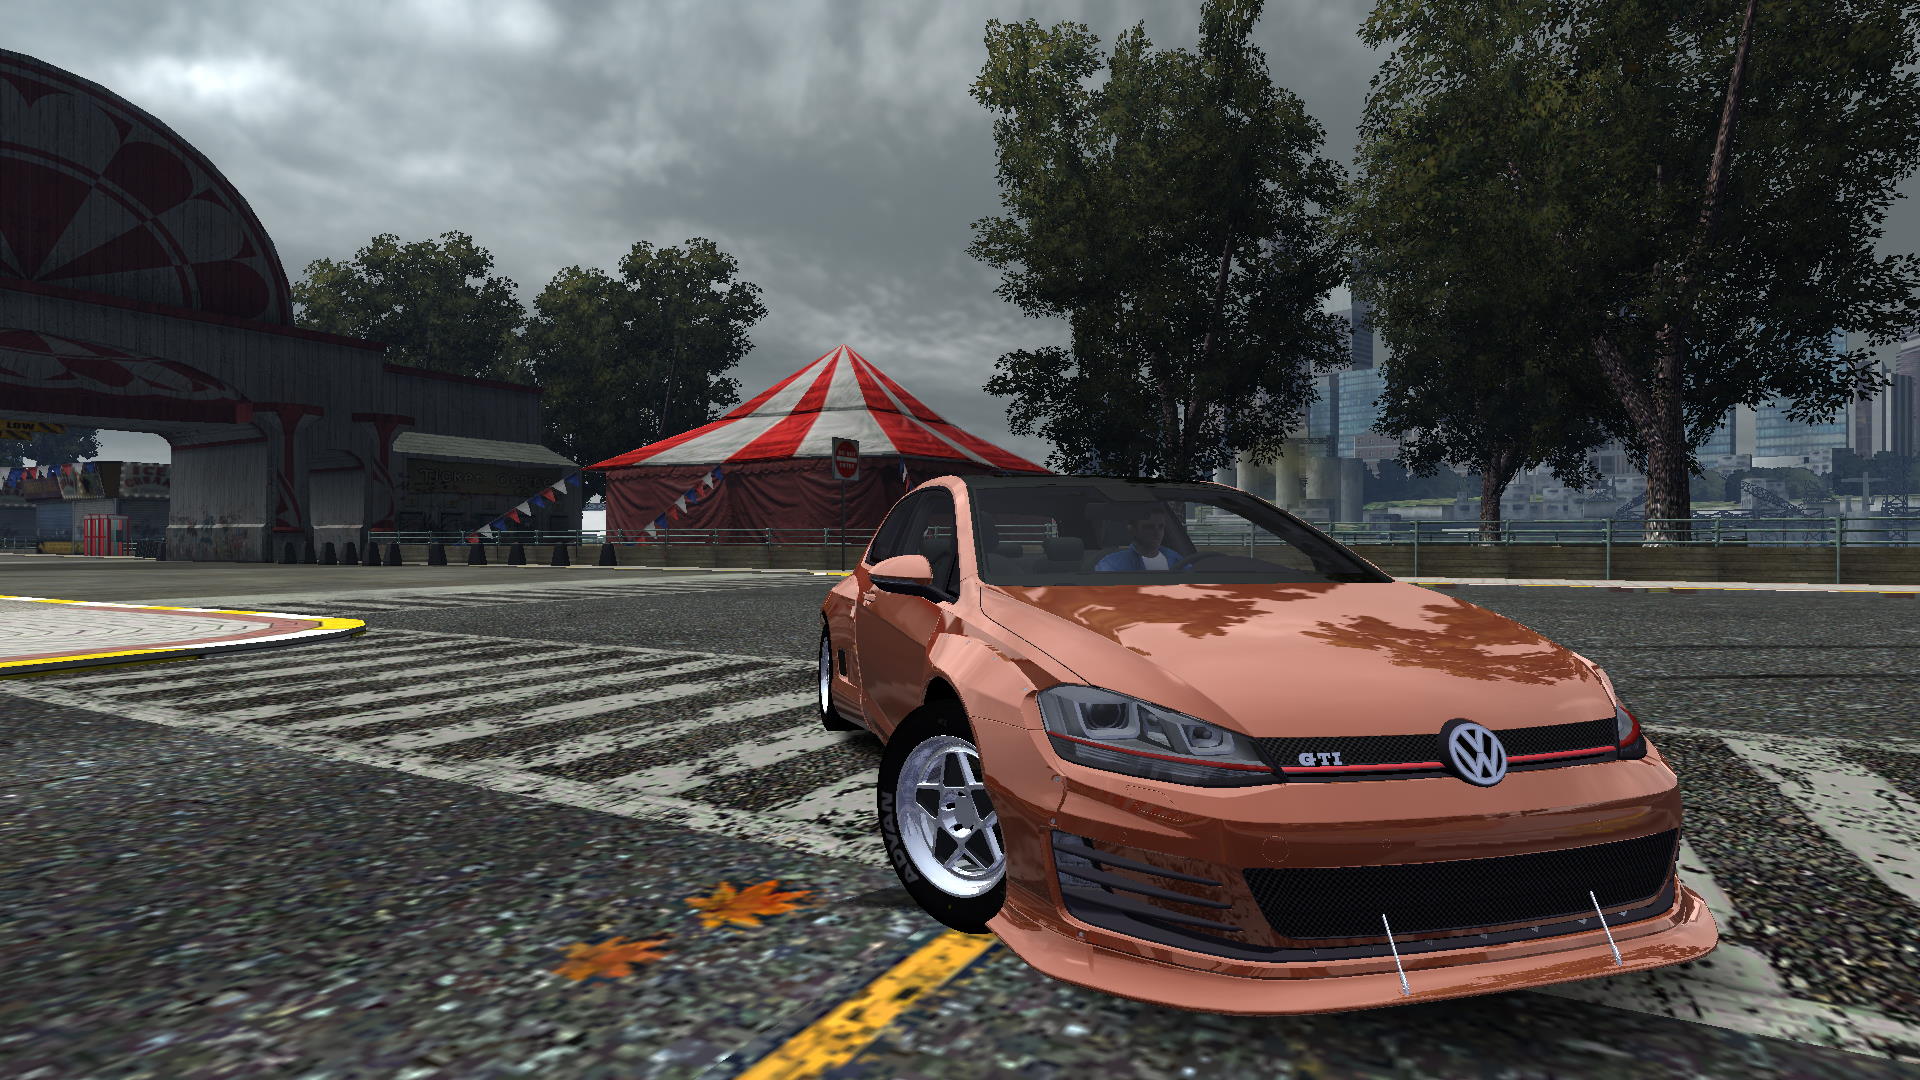 Need For Speed Most Wanted 2014 Volkswagen Golf GTI Rocket Bunny